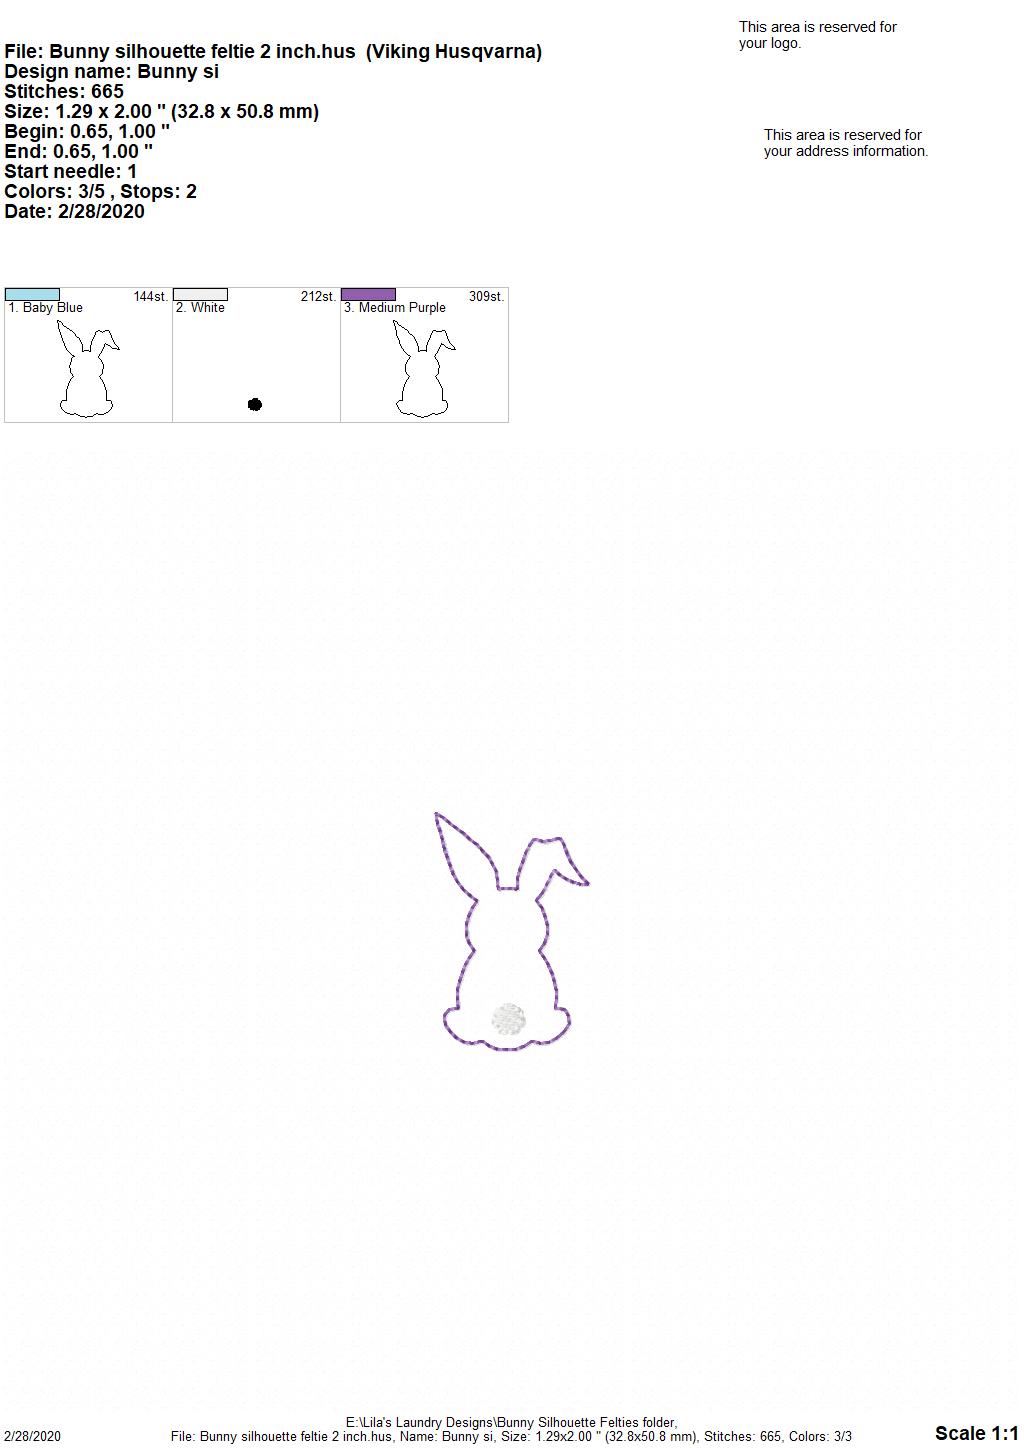 Bunny Silhouette Felties - 4 sizes - 4x4 and 5x7 Grouped- Digital Embroidery Design